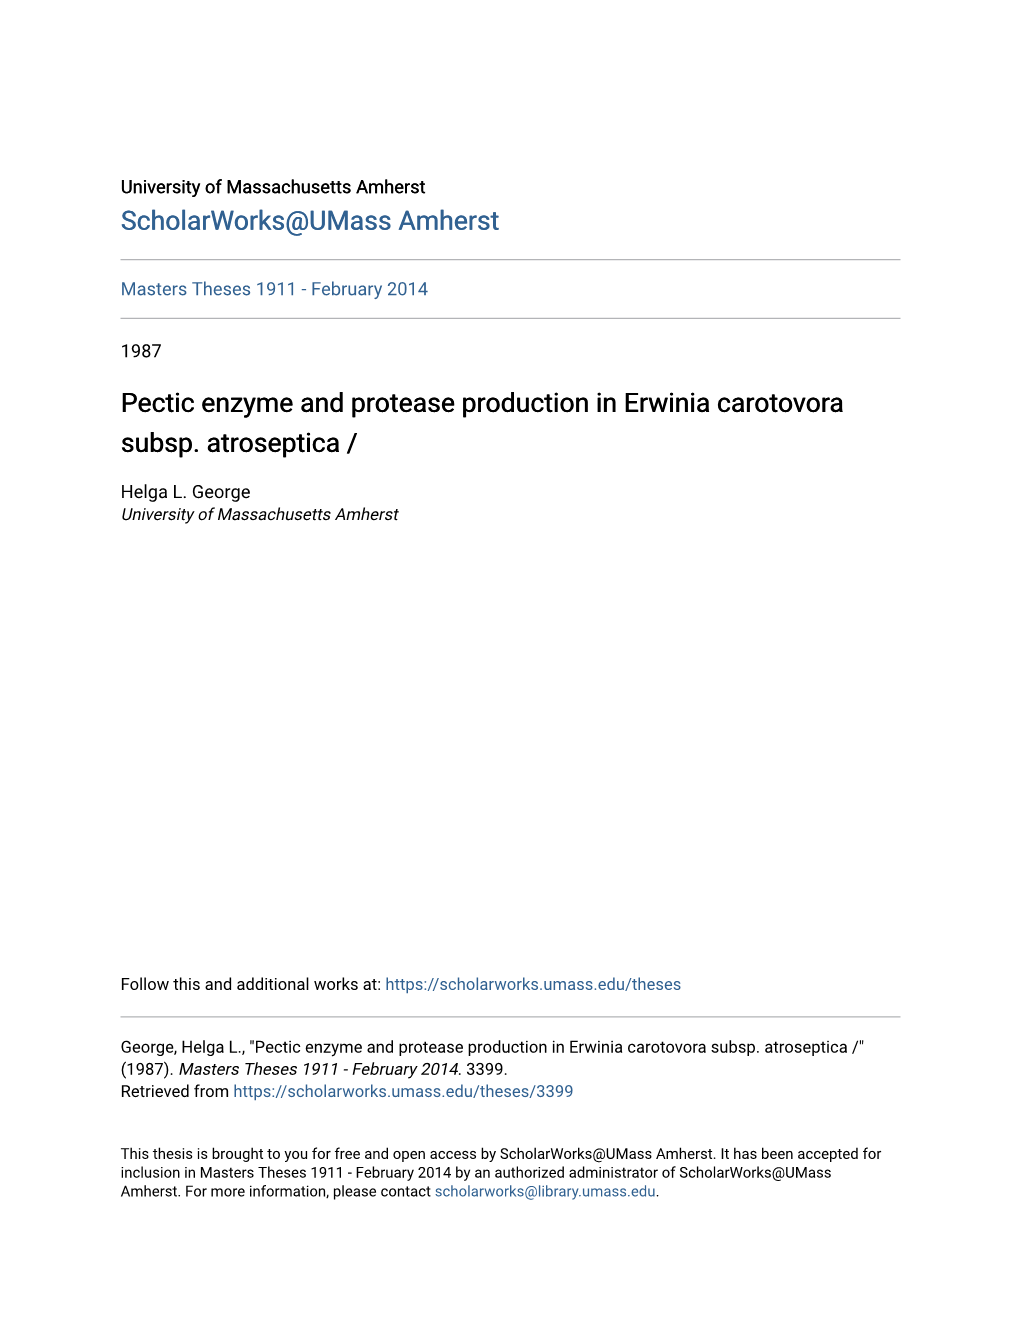 Pectic Enzyme and Protease Production in Erwinia Carotovora Subsp